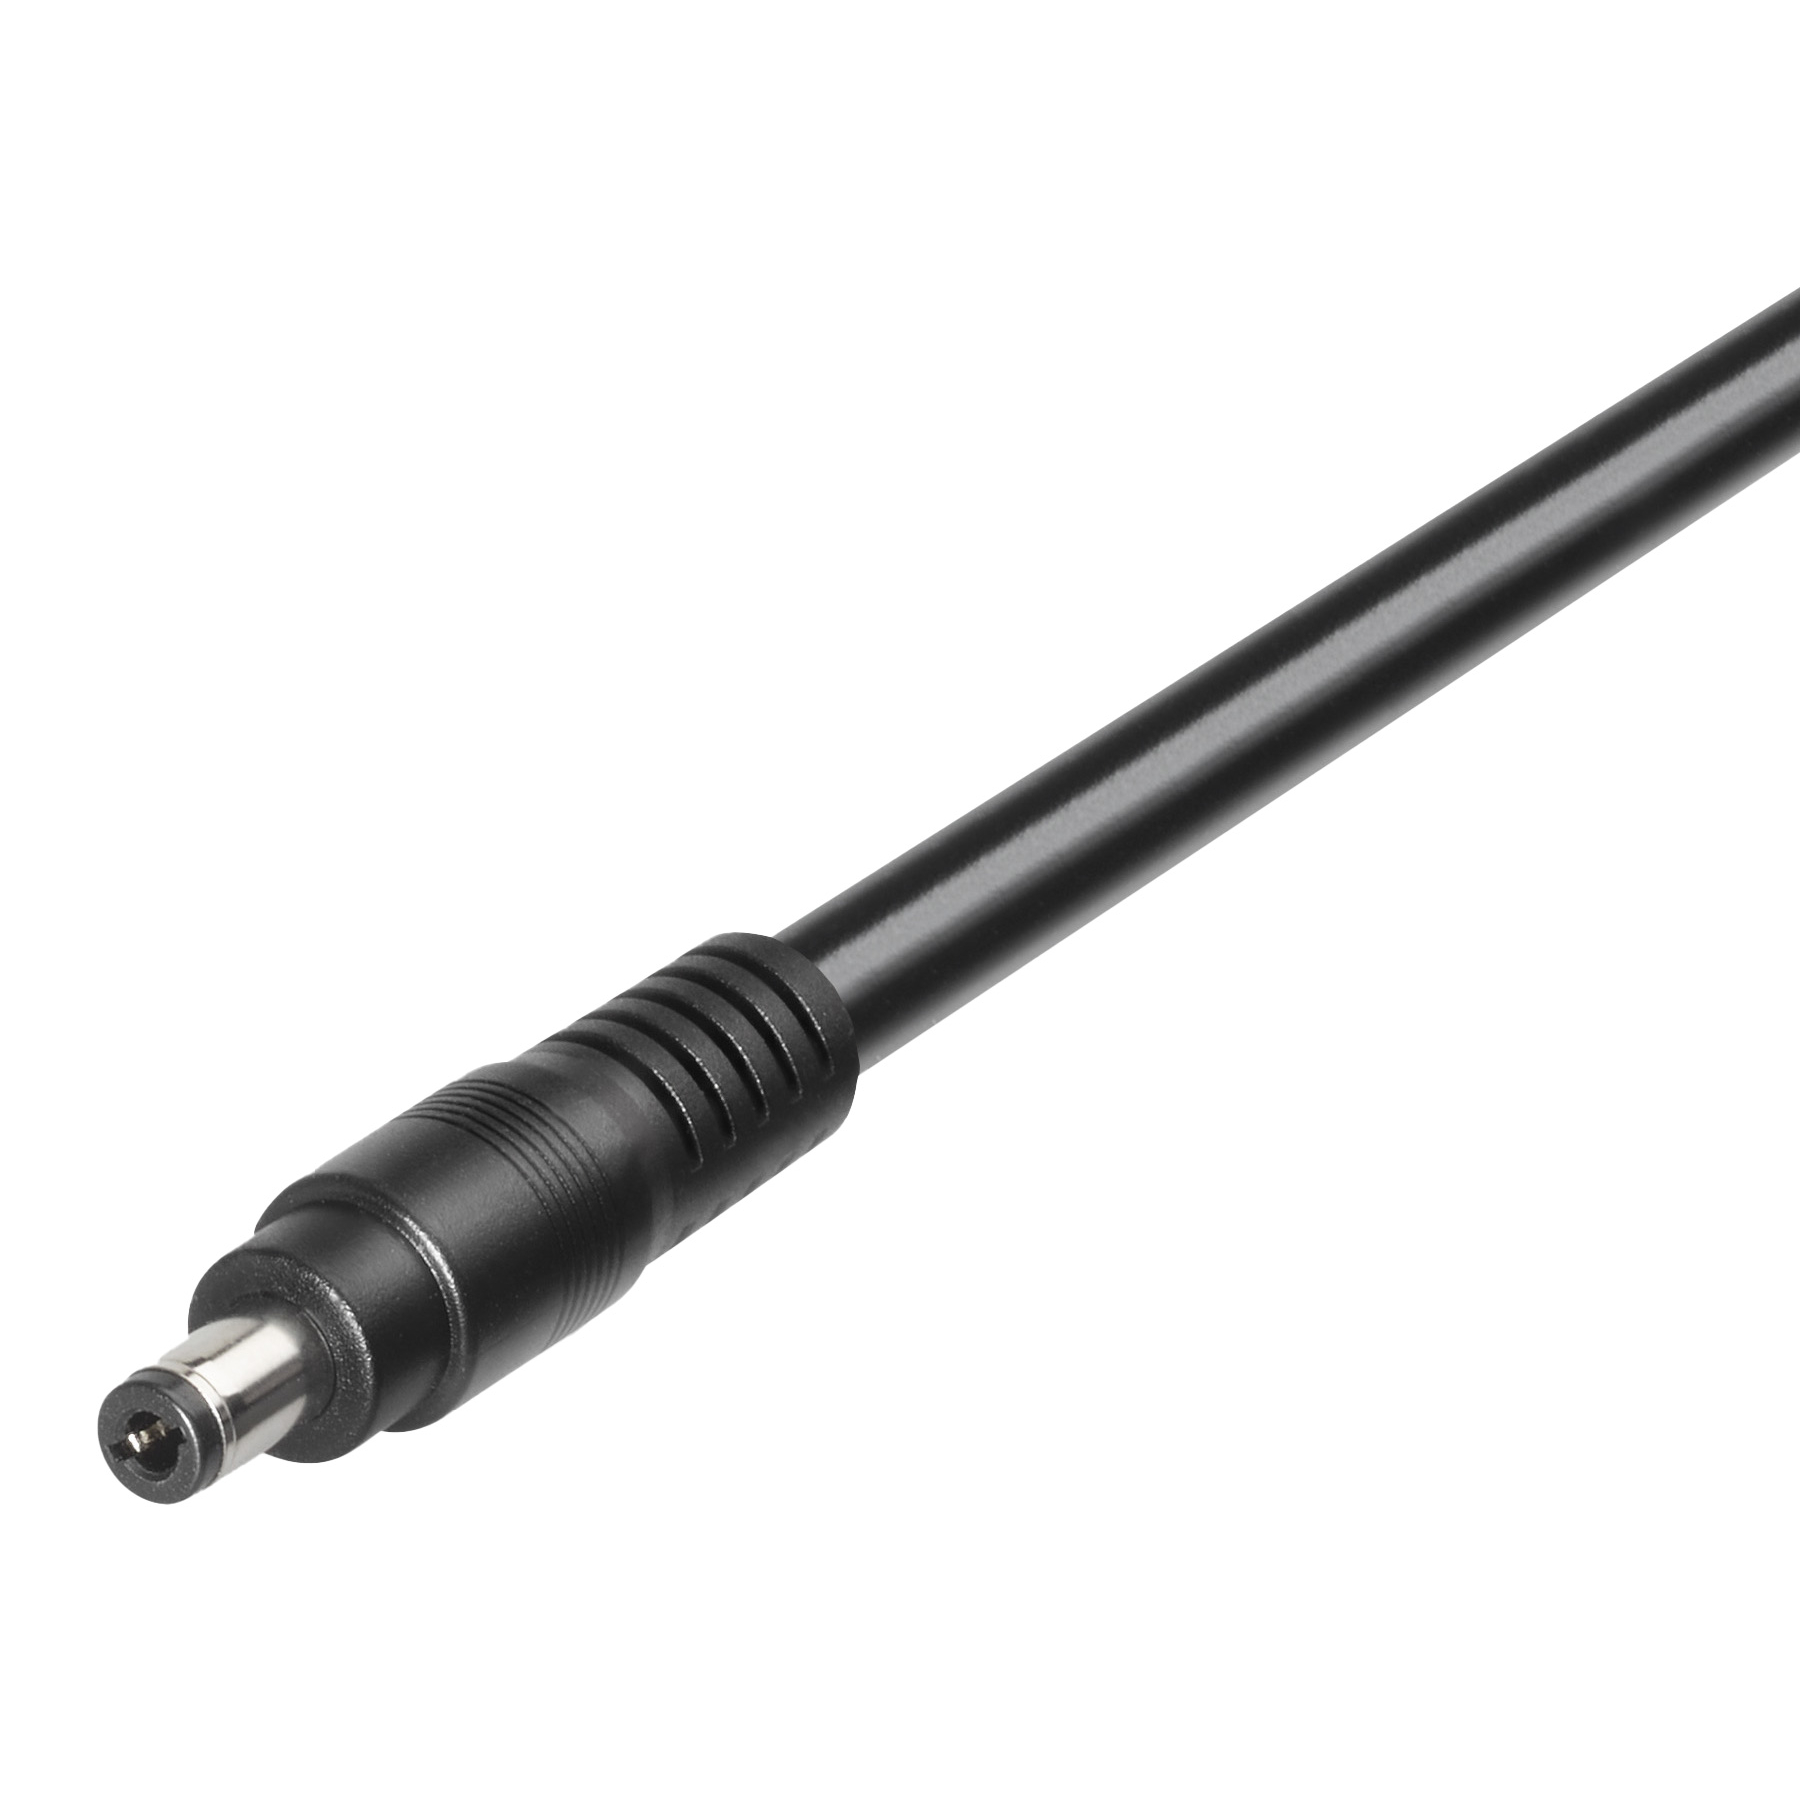 Productfoto van ONgineer Secondary Cable for LiON Smart Charger - Coaxial 5,5 x 2,1 (Ansmann, DeHawk)